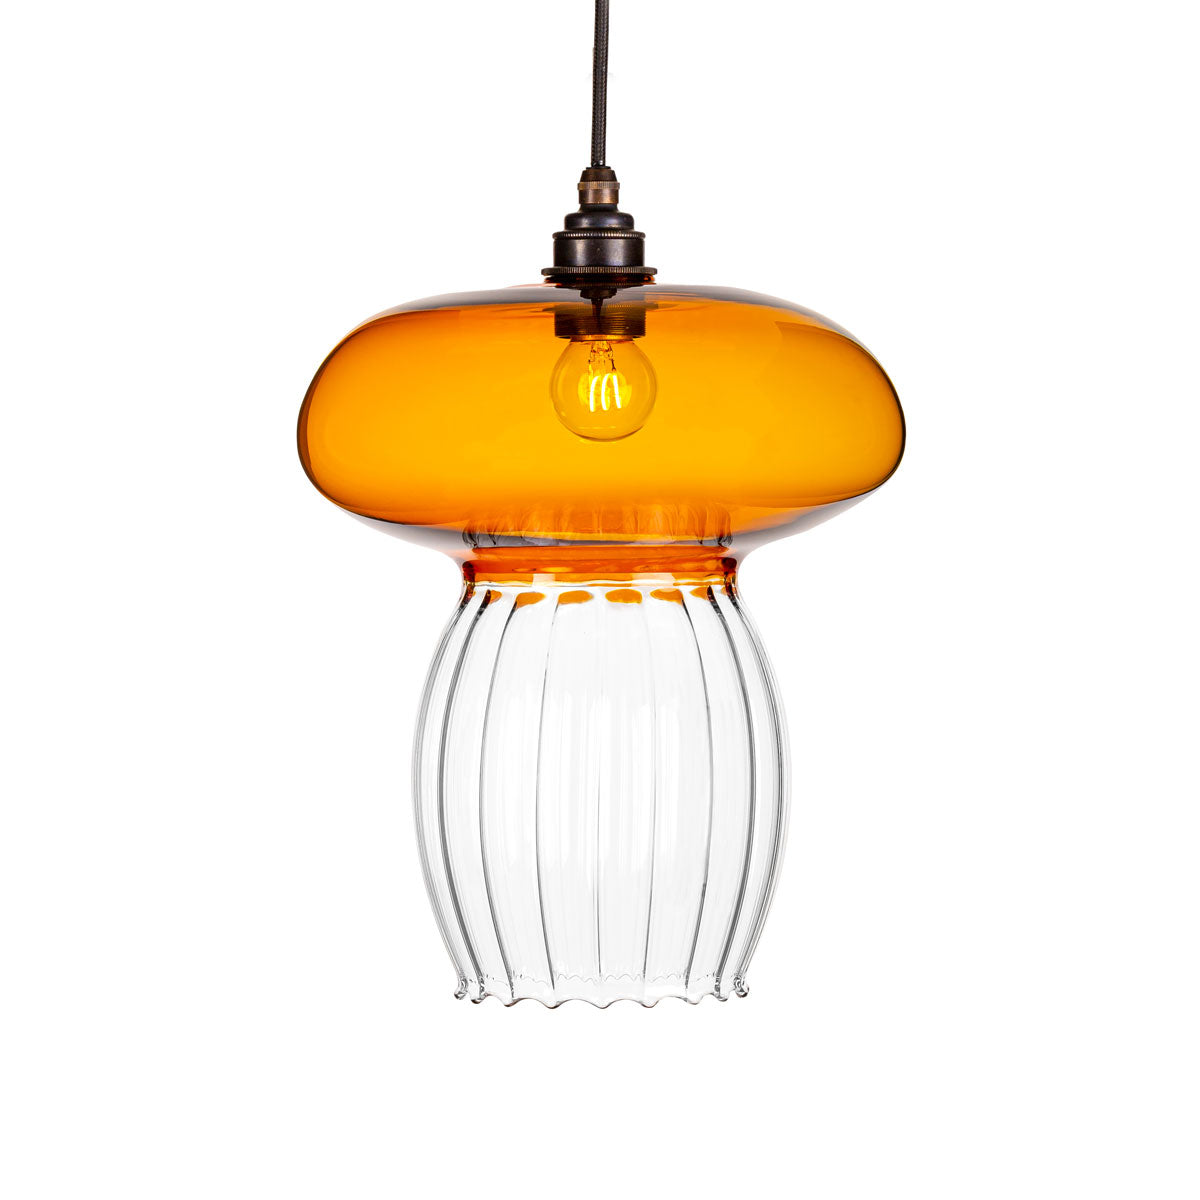 Bayswater glass pendant light in orange sold by South Charlotte Fine Lighting